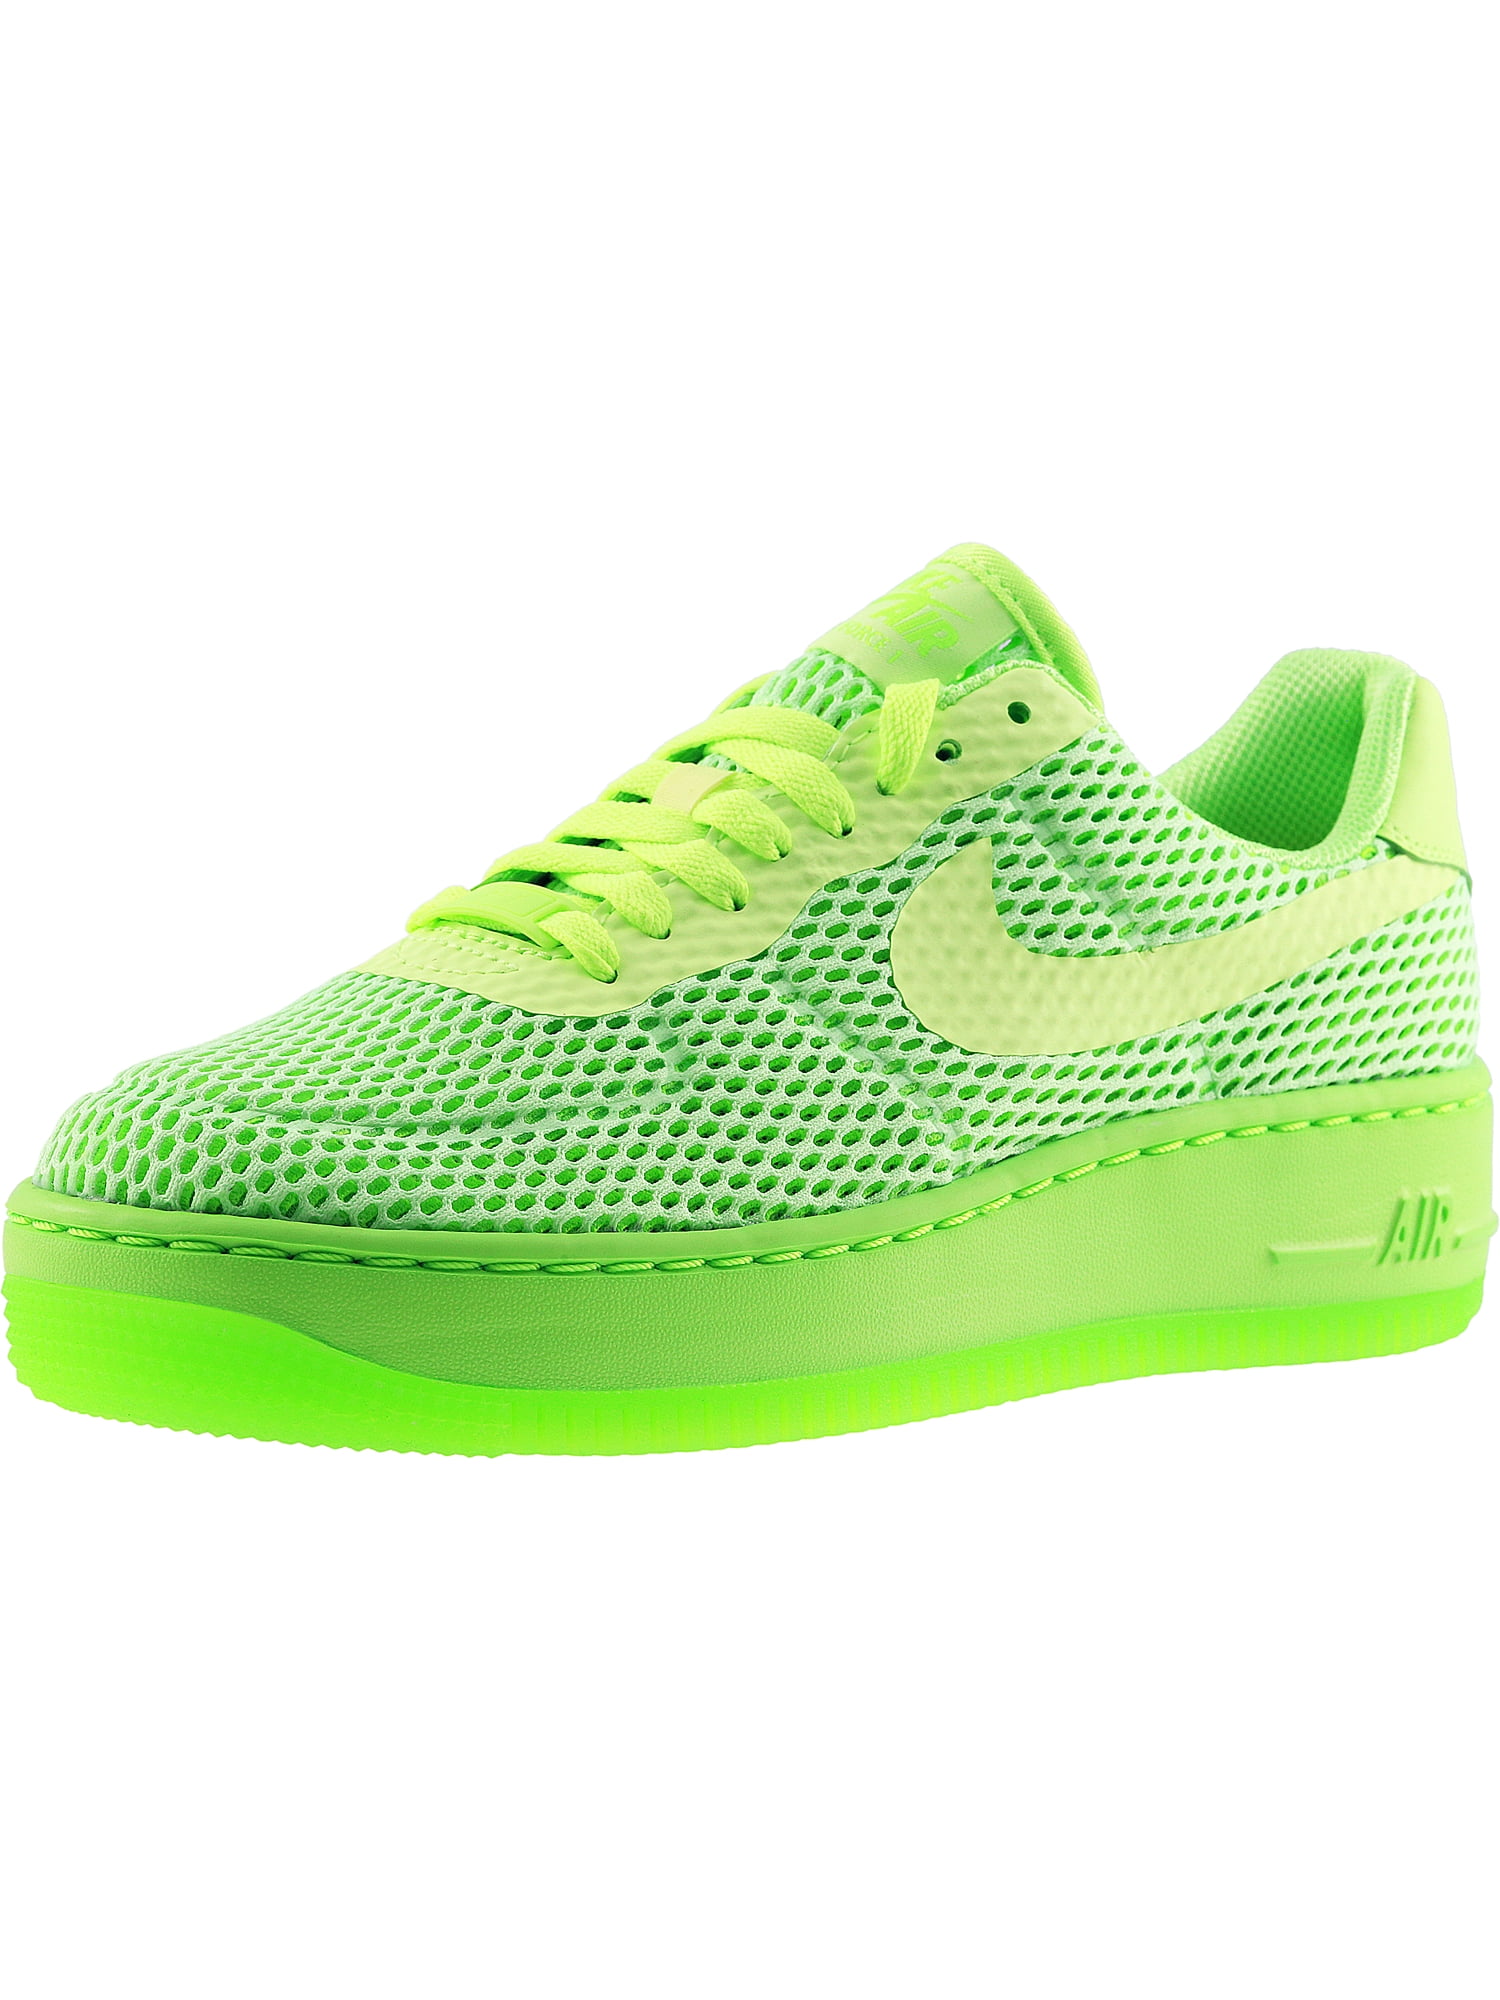 lime green air force 1 toddler